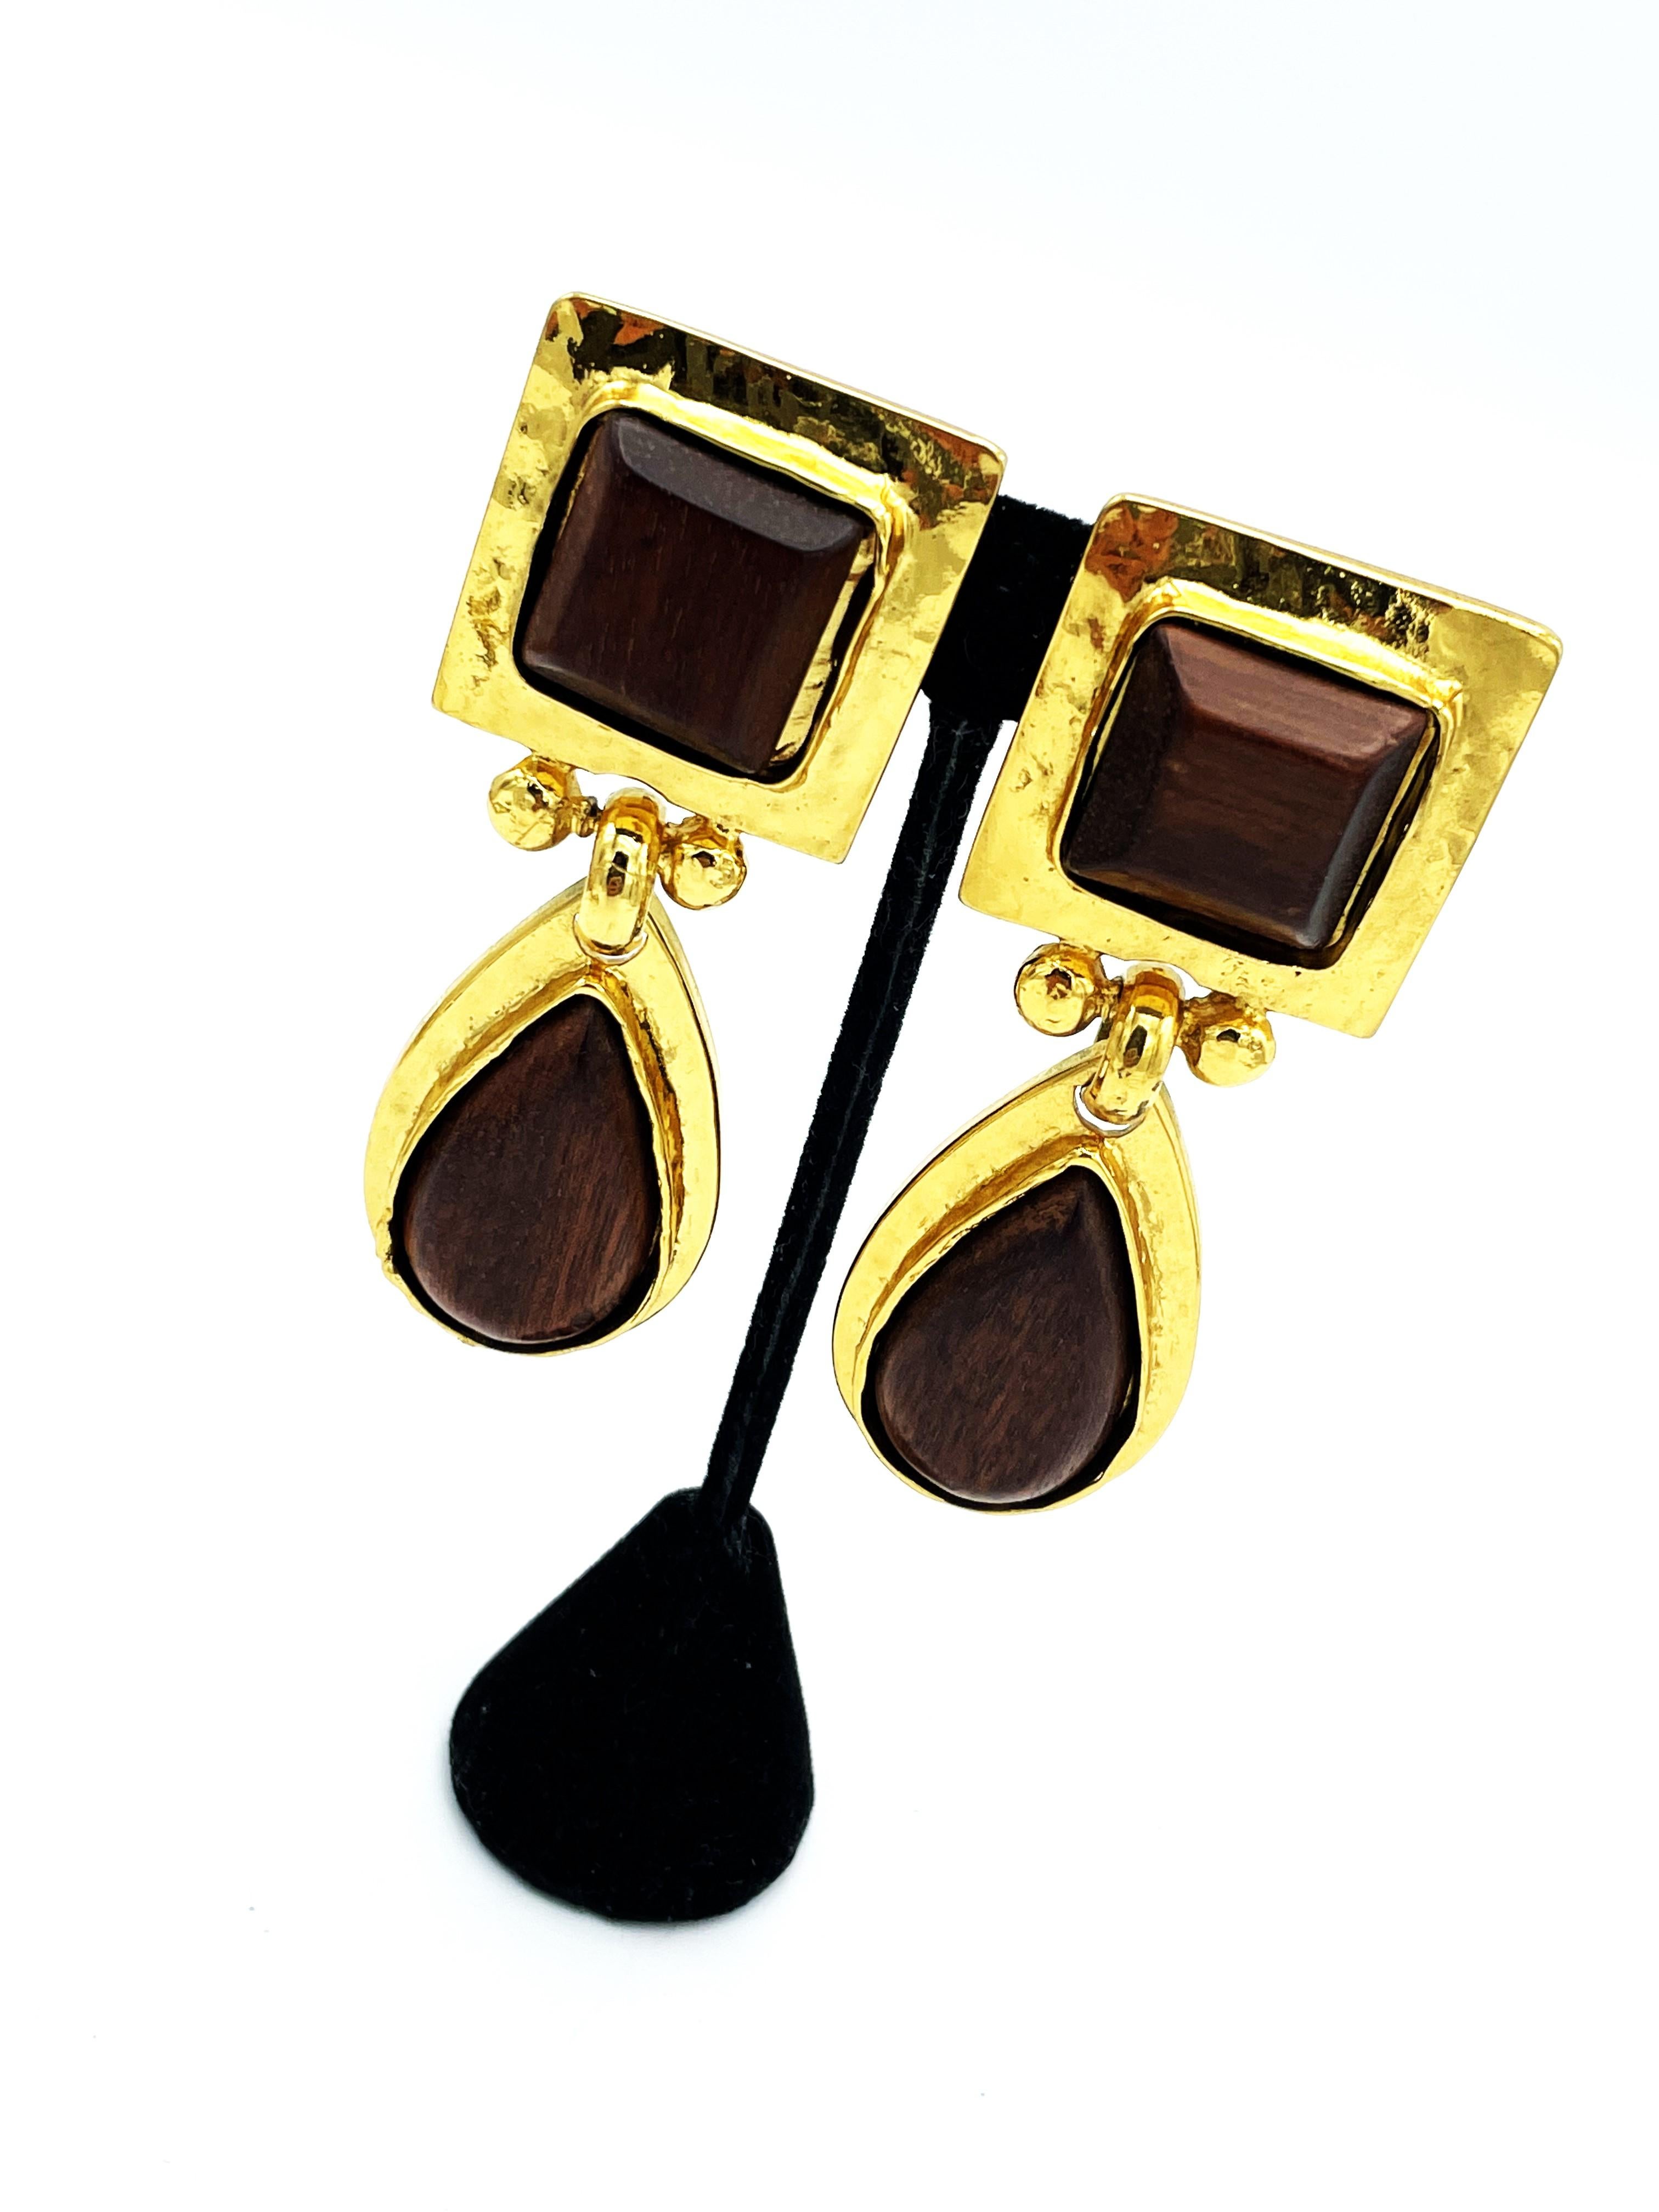 Clip-on earring by Eduard Rambaud Paris, 2 parts with wood filling, gilded  In Excellent Condition For Sale In Stuttgart, DE